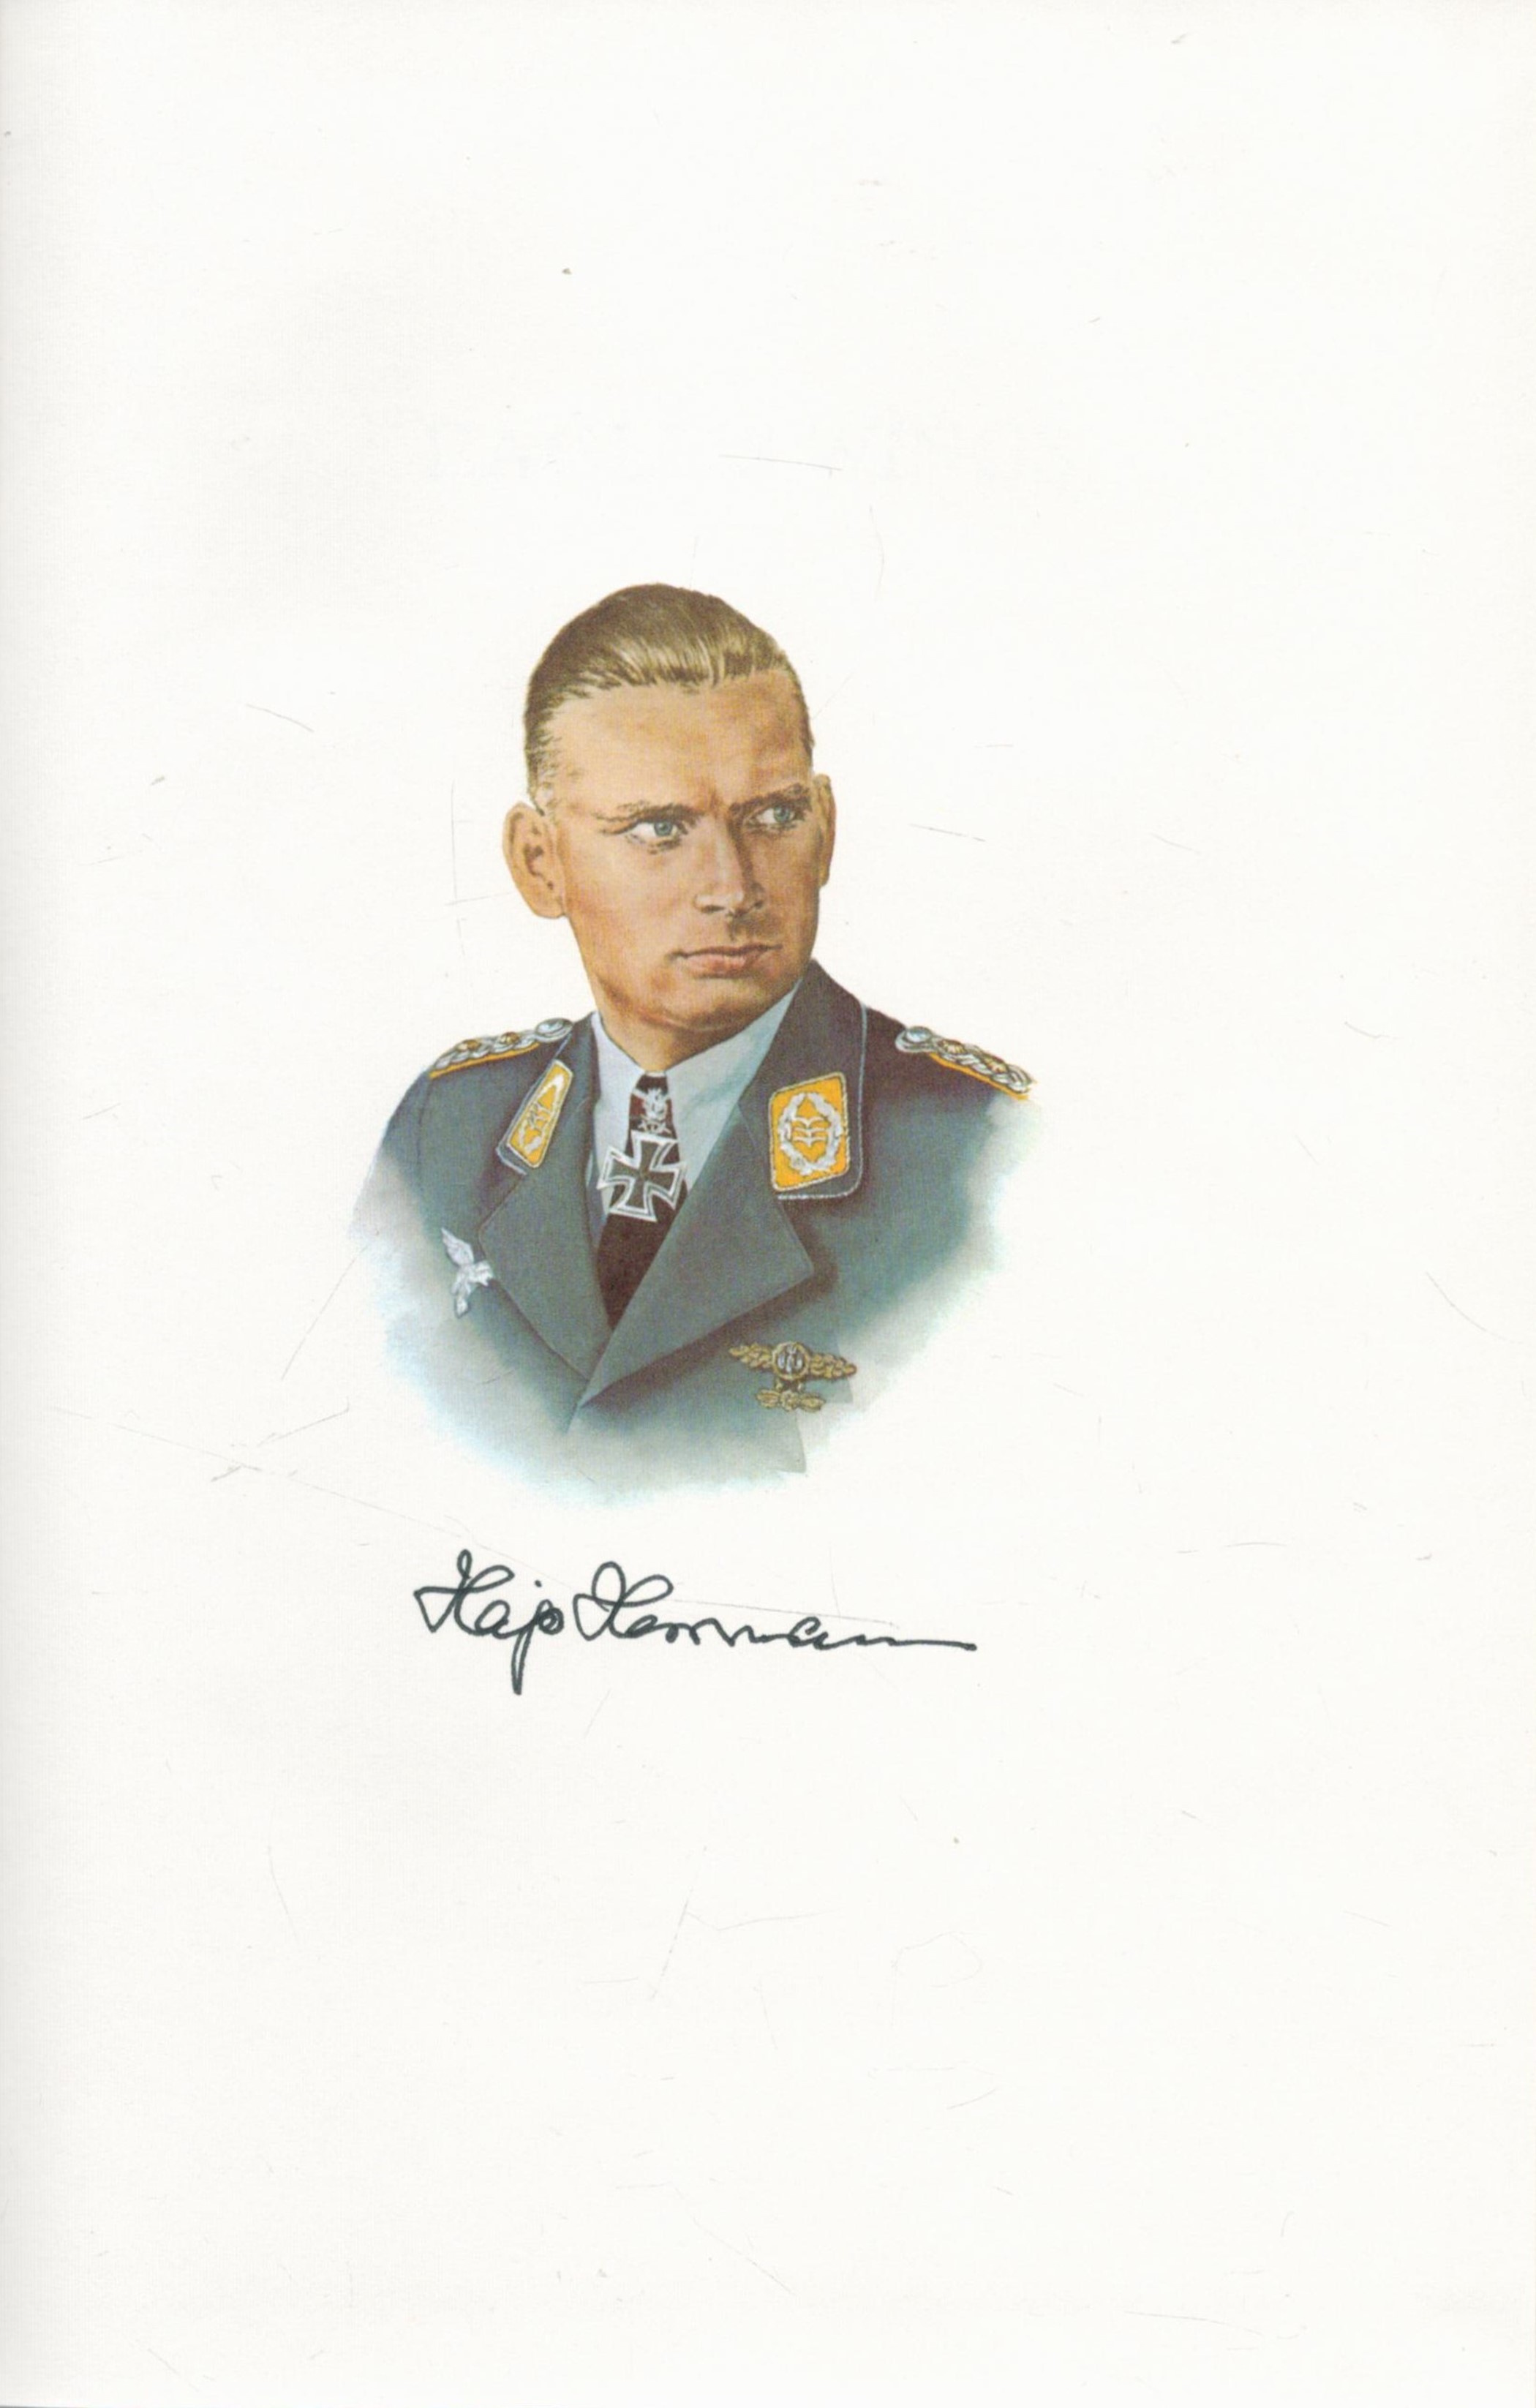 Hajo Herrmann Signed Book Eagle's Wings by Hajo Herrmann Translated by Peter Hinchliffe OBE 1991 - Image 2 of 4